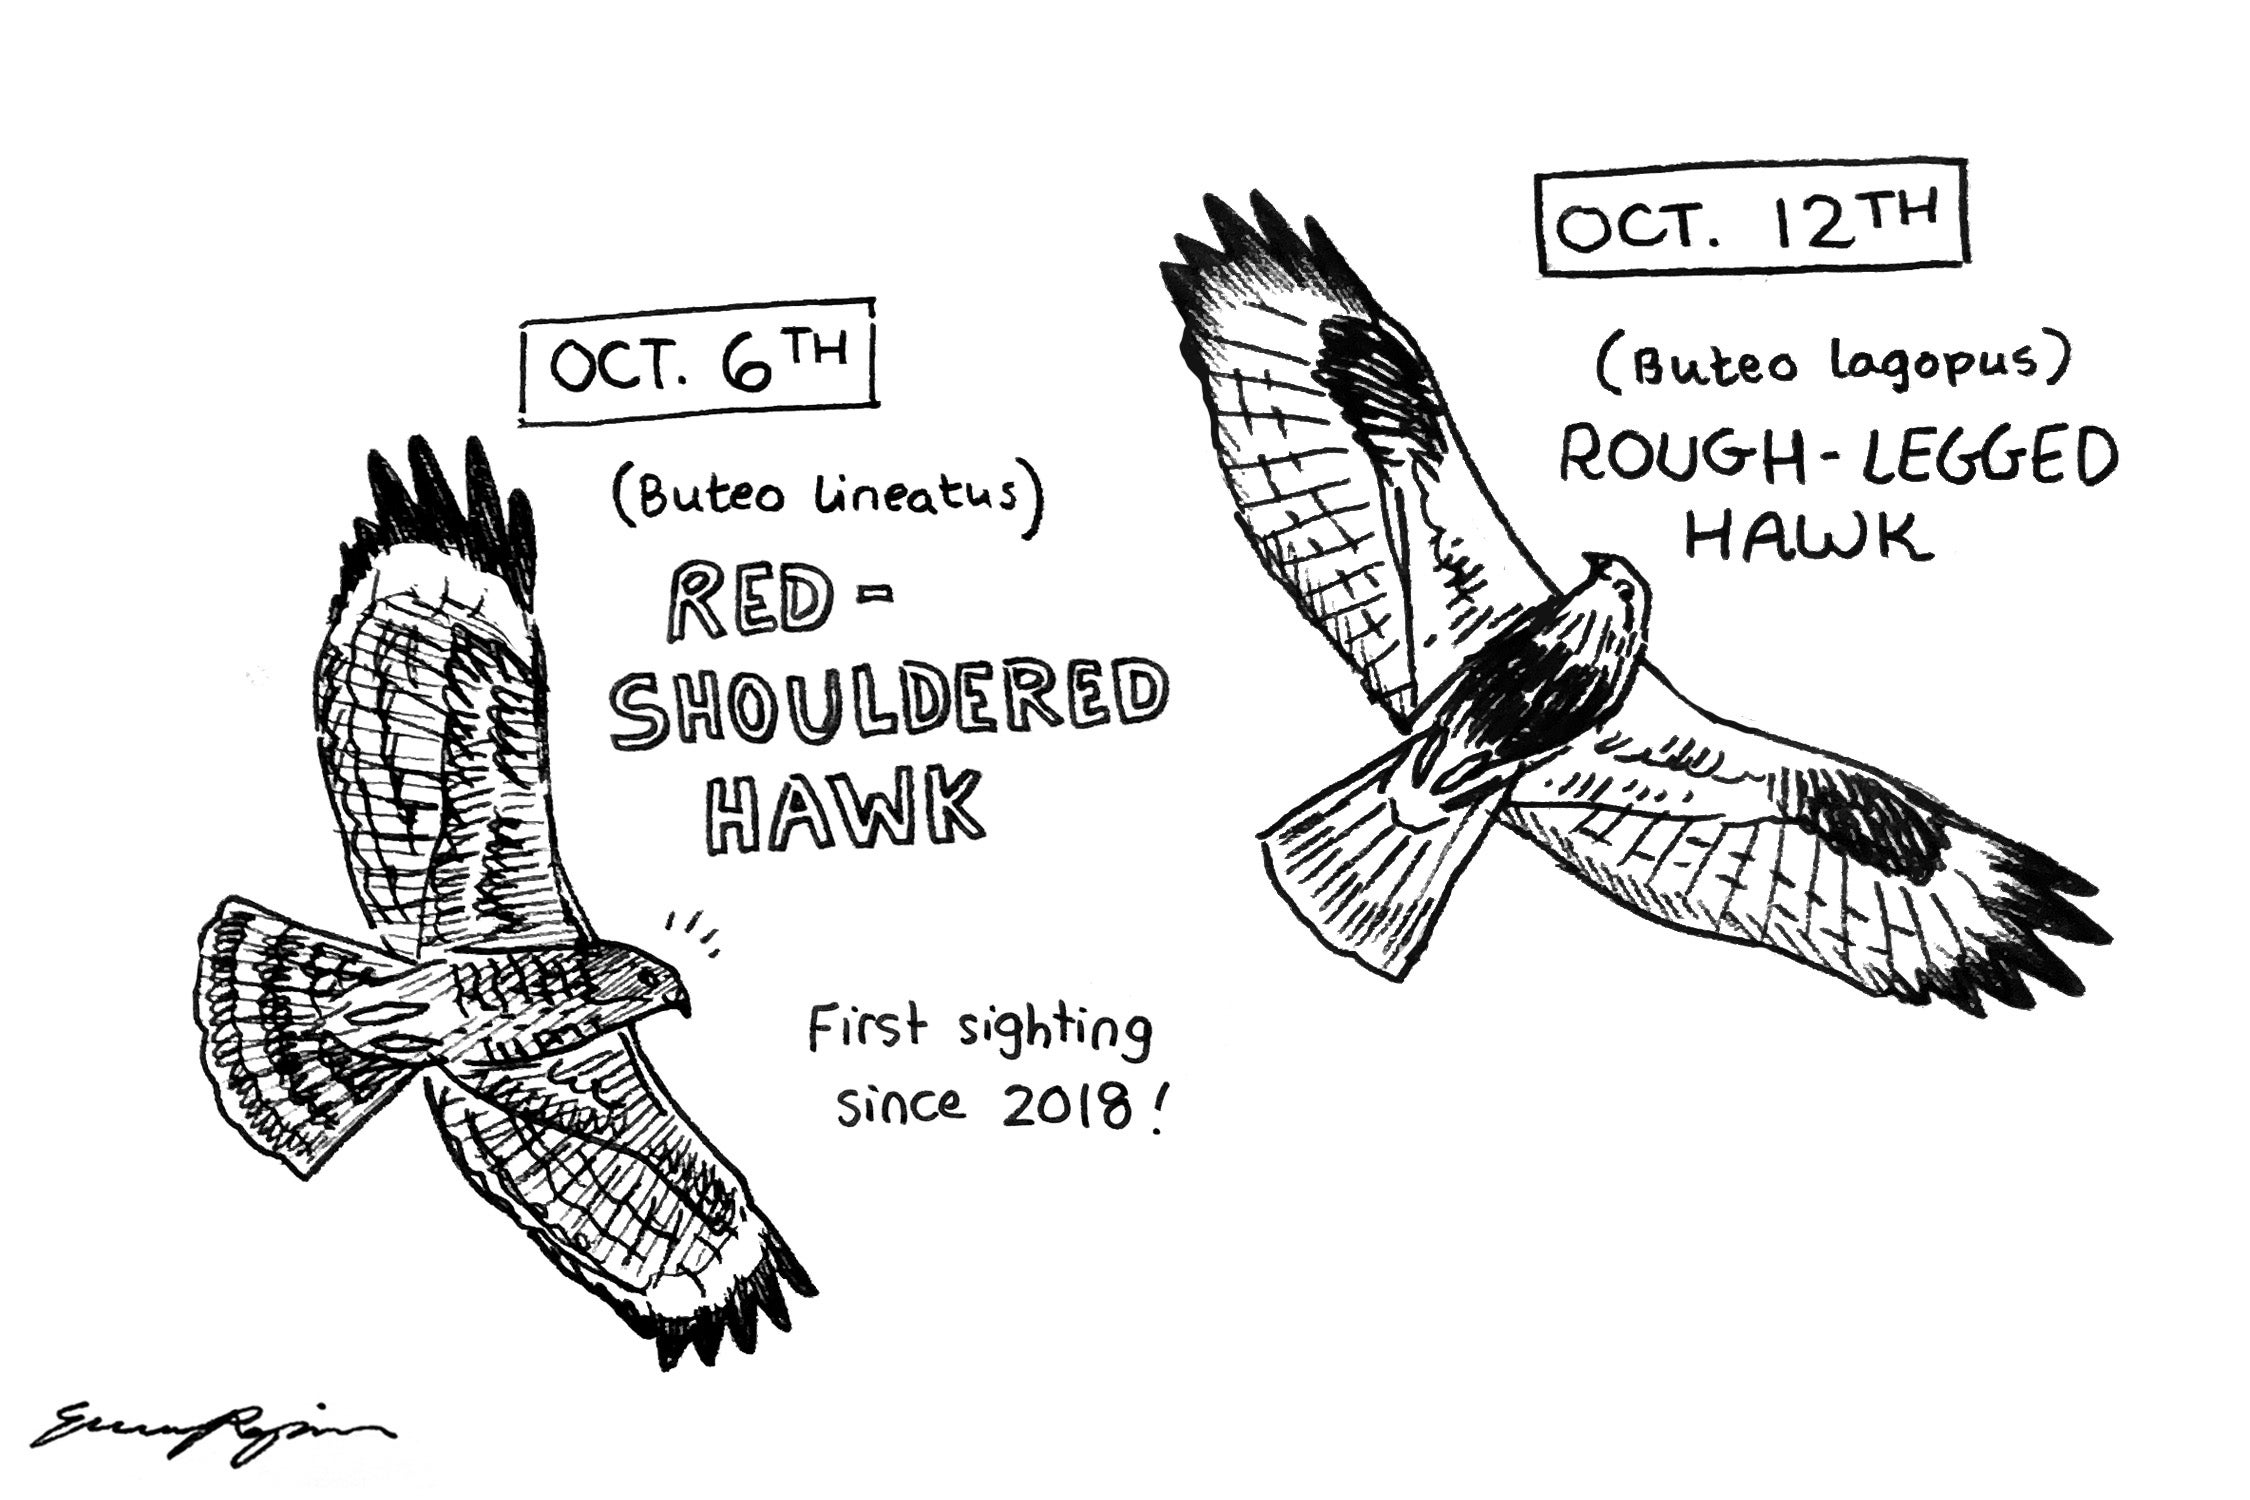 a cartoon-style sketch of a Red-shouldered hawk and rough-legged hawk. Each hawk is labeled with their common and latin name, and both have a quizzical look on their face